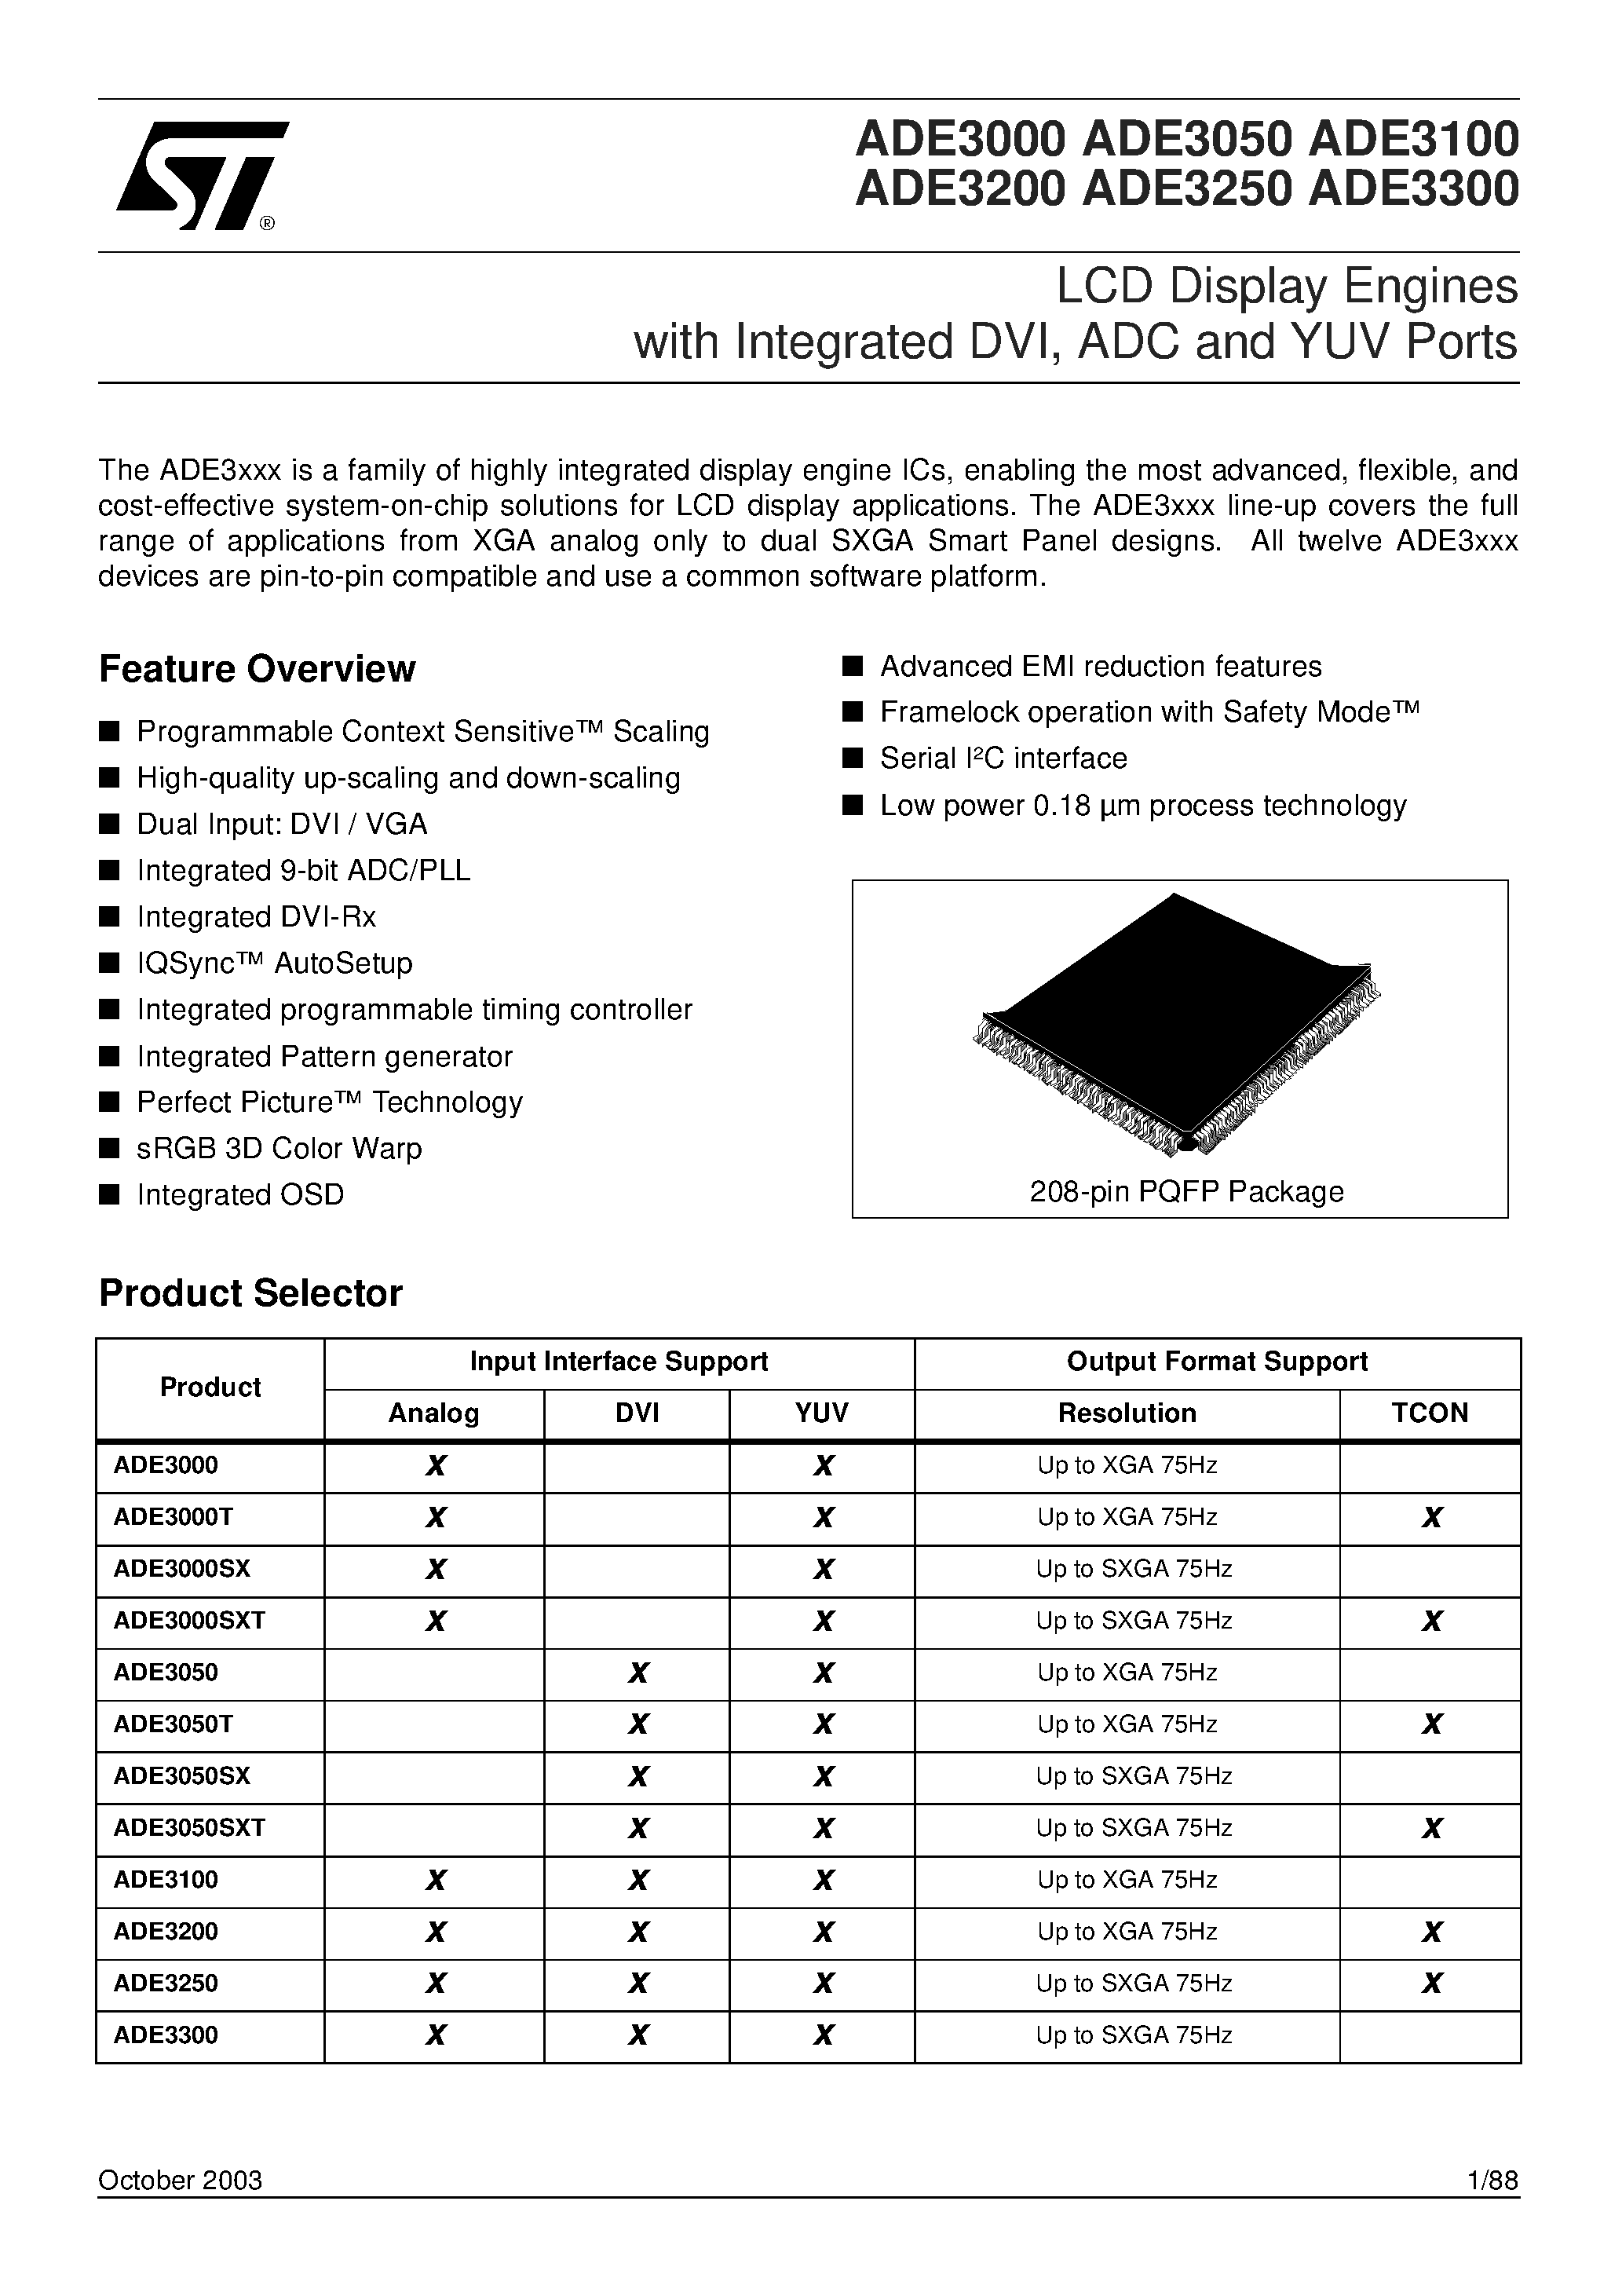 Datasheet ADE3000 - LCD Display Engines with Integrated DVI/ ADC and YUV Ports page 1